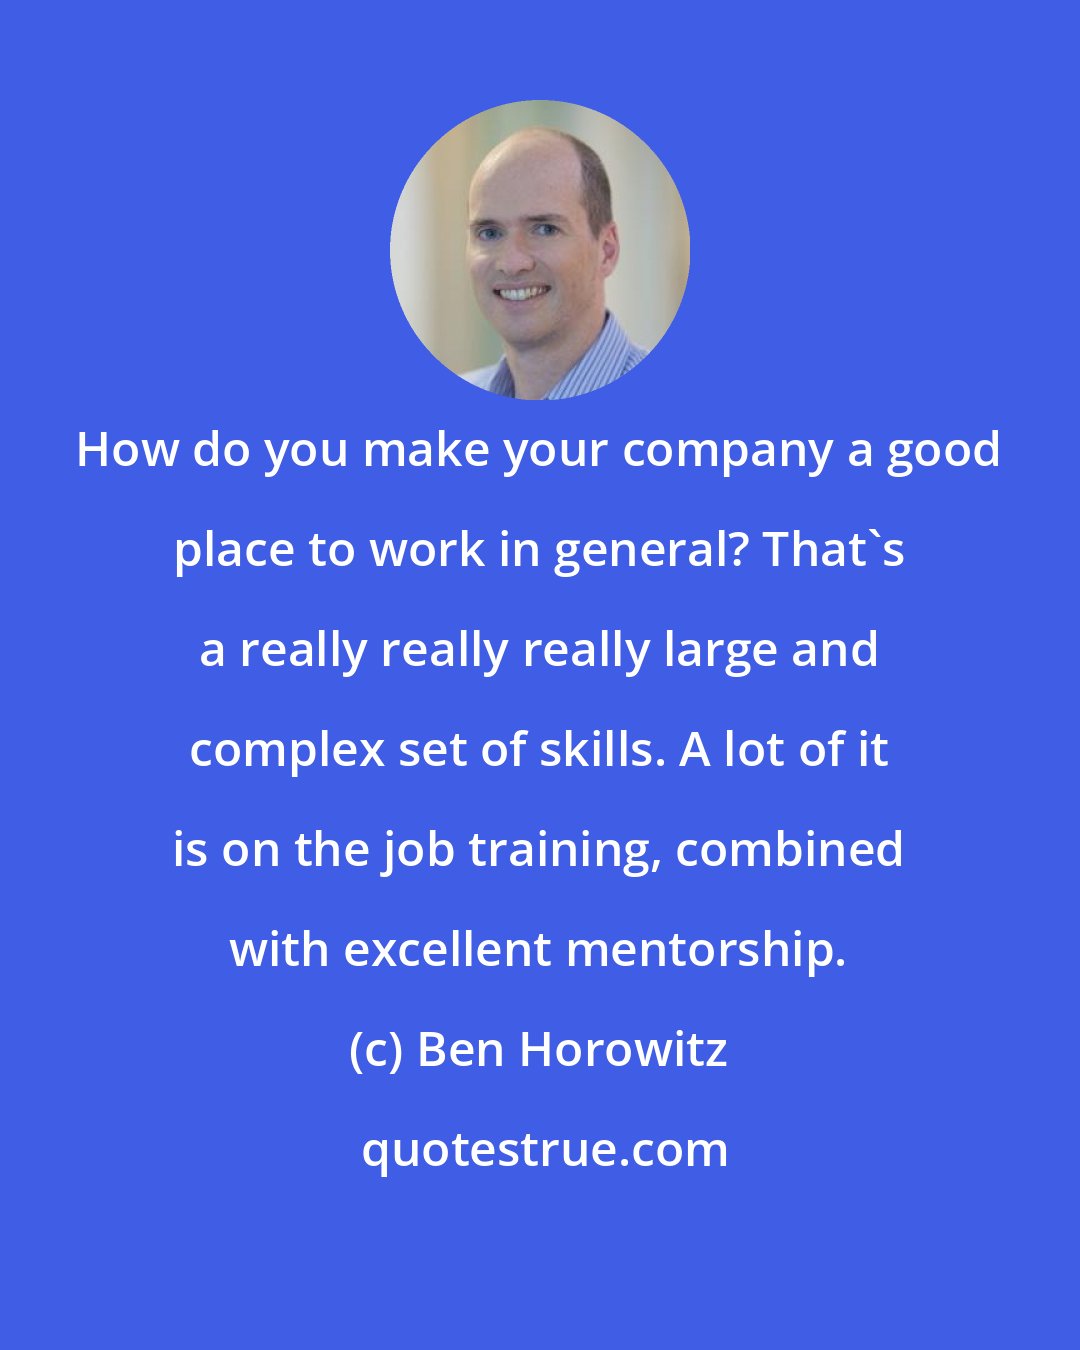 Ben Horowitz: How do you make your company a good place to work in general? That's a really really really large and complex set of skills. A lot of it is on the job training, combined with excellent mentorship.